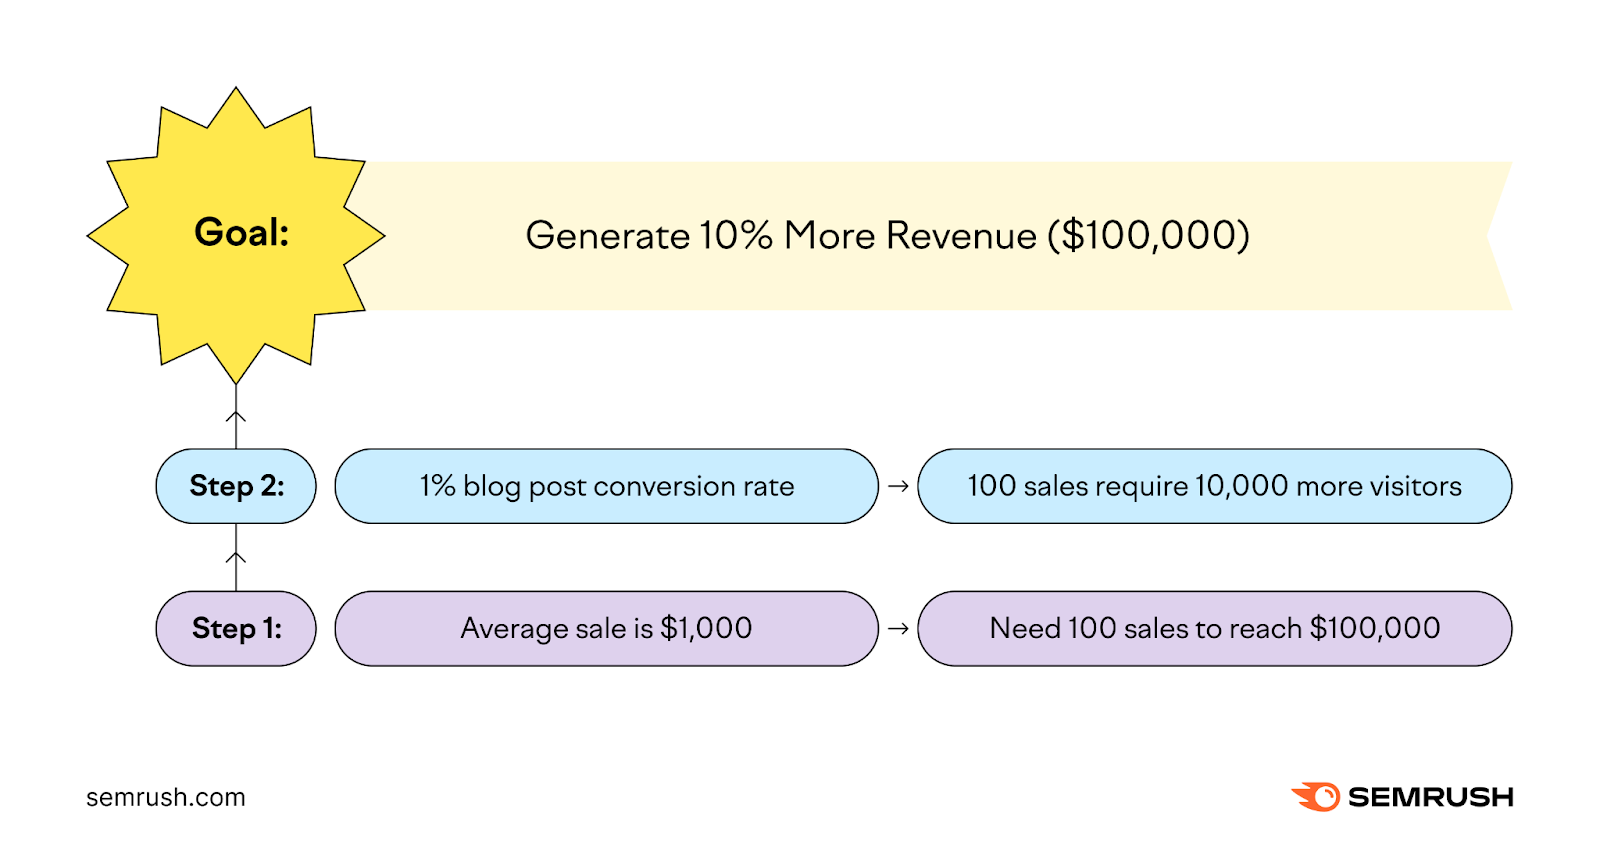 Setting KPIs for 10% more revenue, which equals $100,000 goal